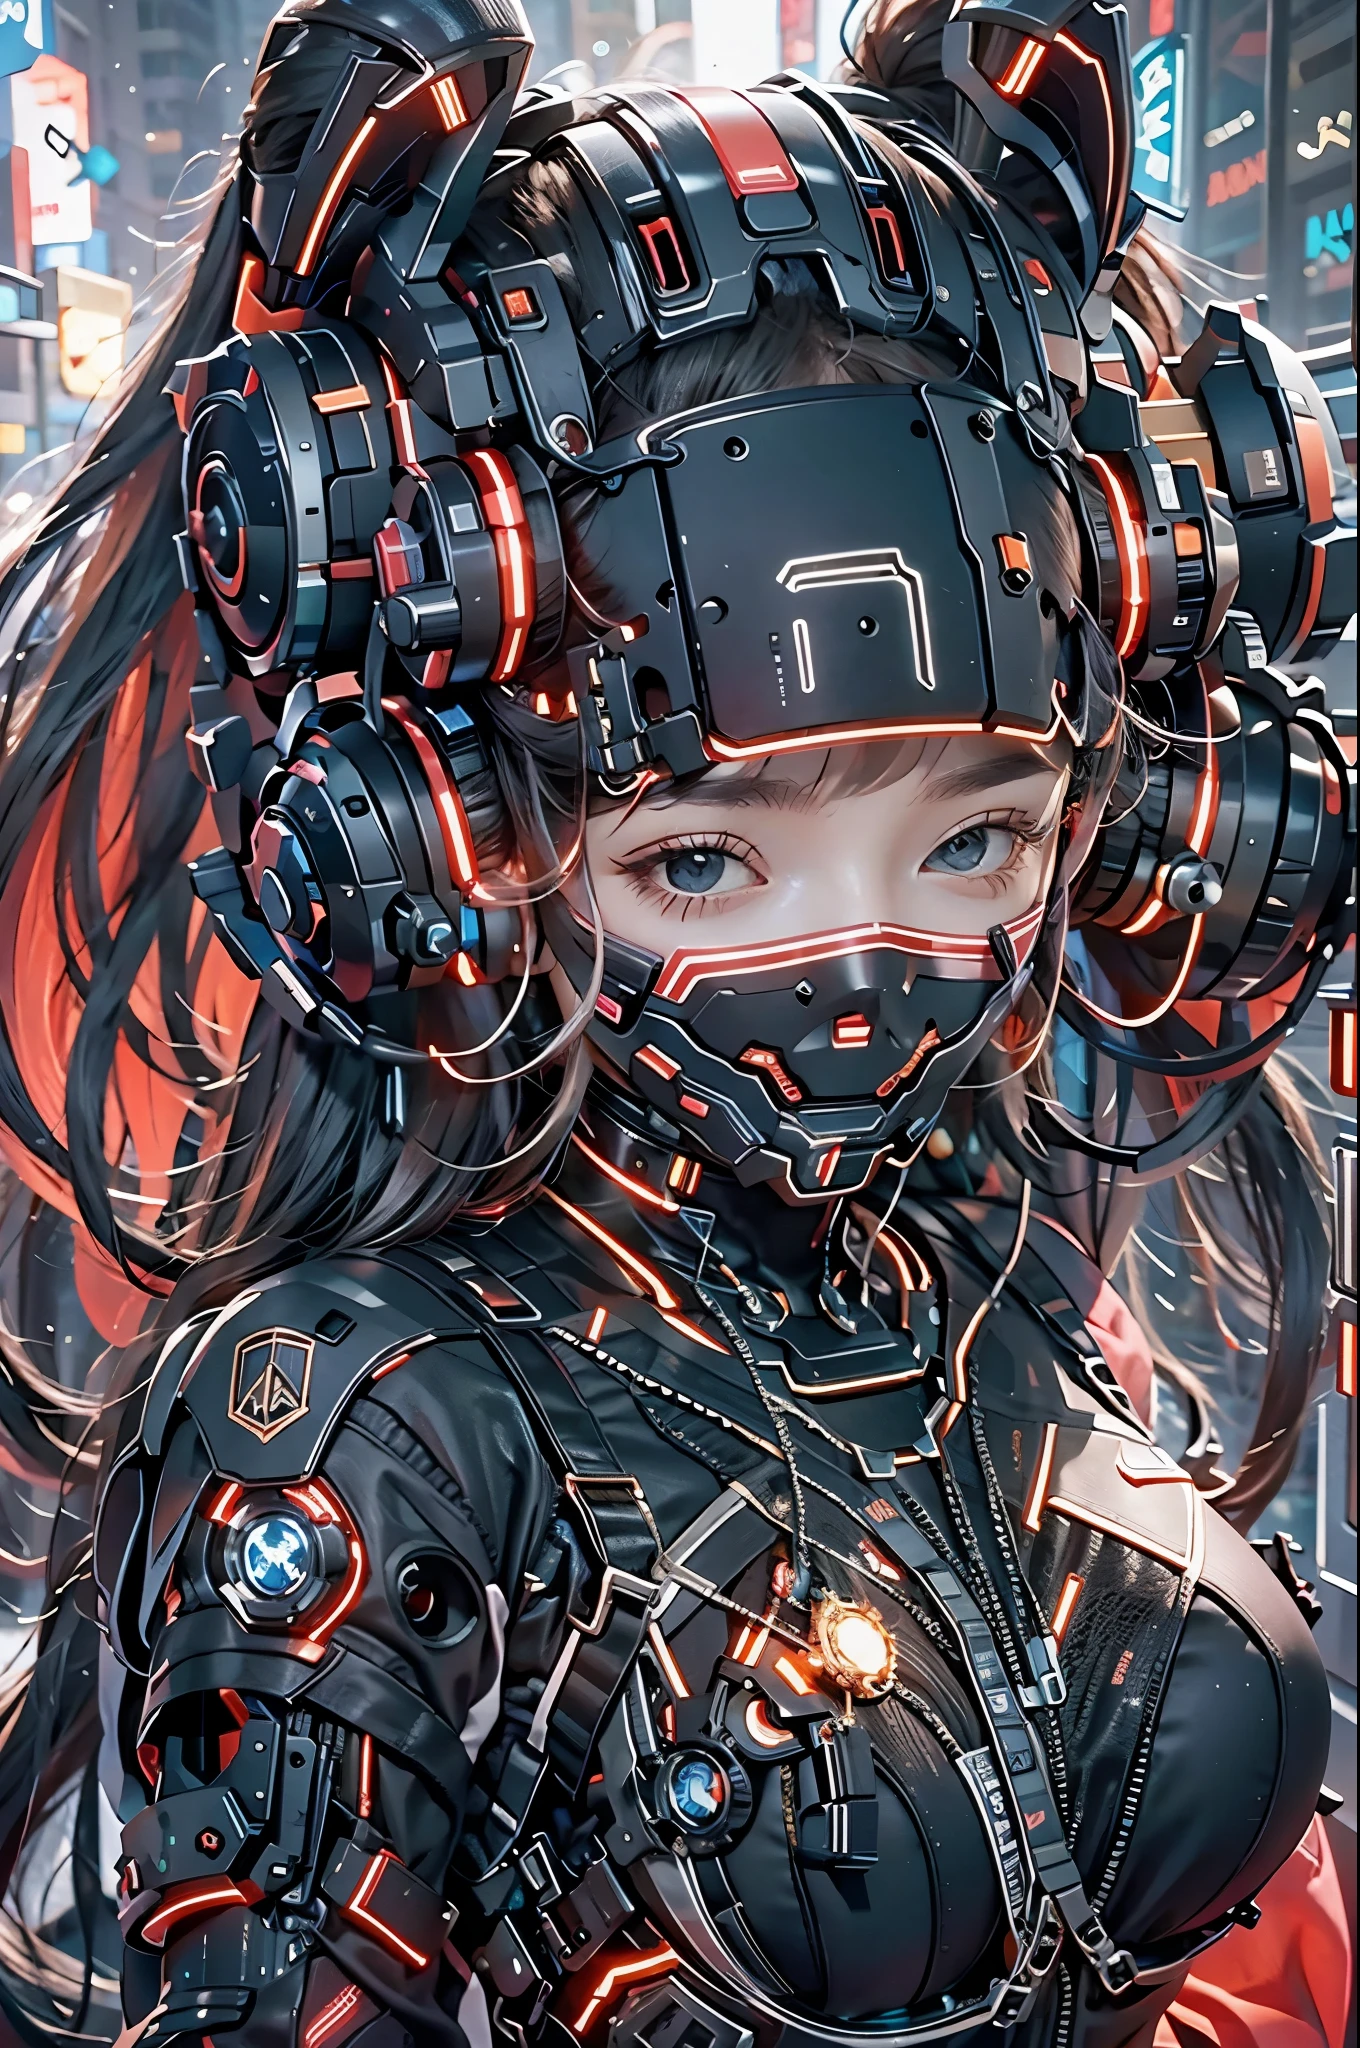 best quality，masterpiece，16k，1girl,Cyberpunk,headset,Mechanical earphones,Luminous earphones,Fragmented mechanical jewelry,Technological background,Positive close-up,Robot arm,The mechanical structure of the earpiece resembling a handgun,Slightly exposed chest,Multi light source earphones,Earphones with super complex mechanical structures,Multi light source neck protection,Emit red light,Strange shaped mechanical earphones,Super complex mechanical earphones,Black mechanical armor,Full body multiple light source points,Urban background,Multi light source background,skyscraper,night